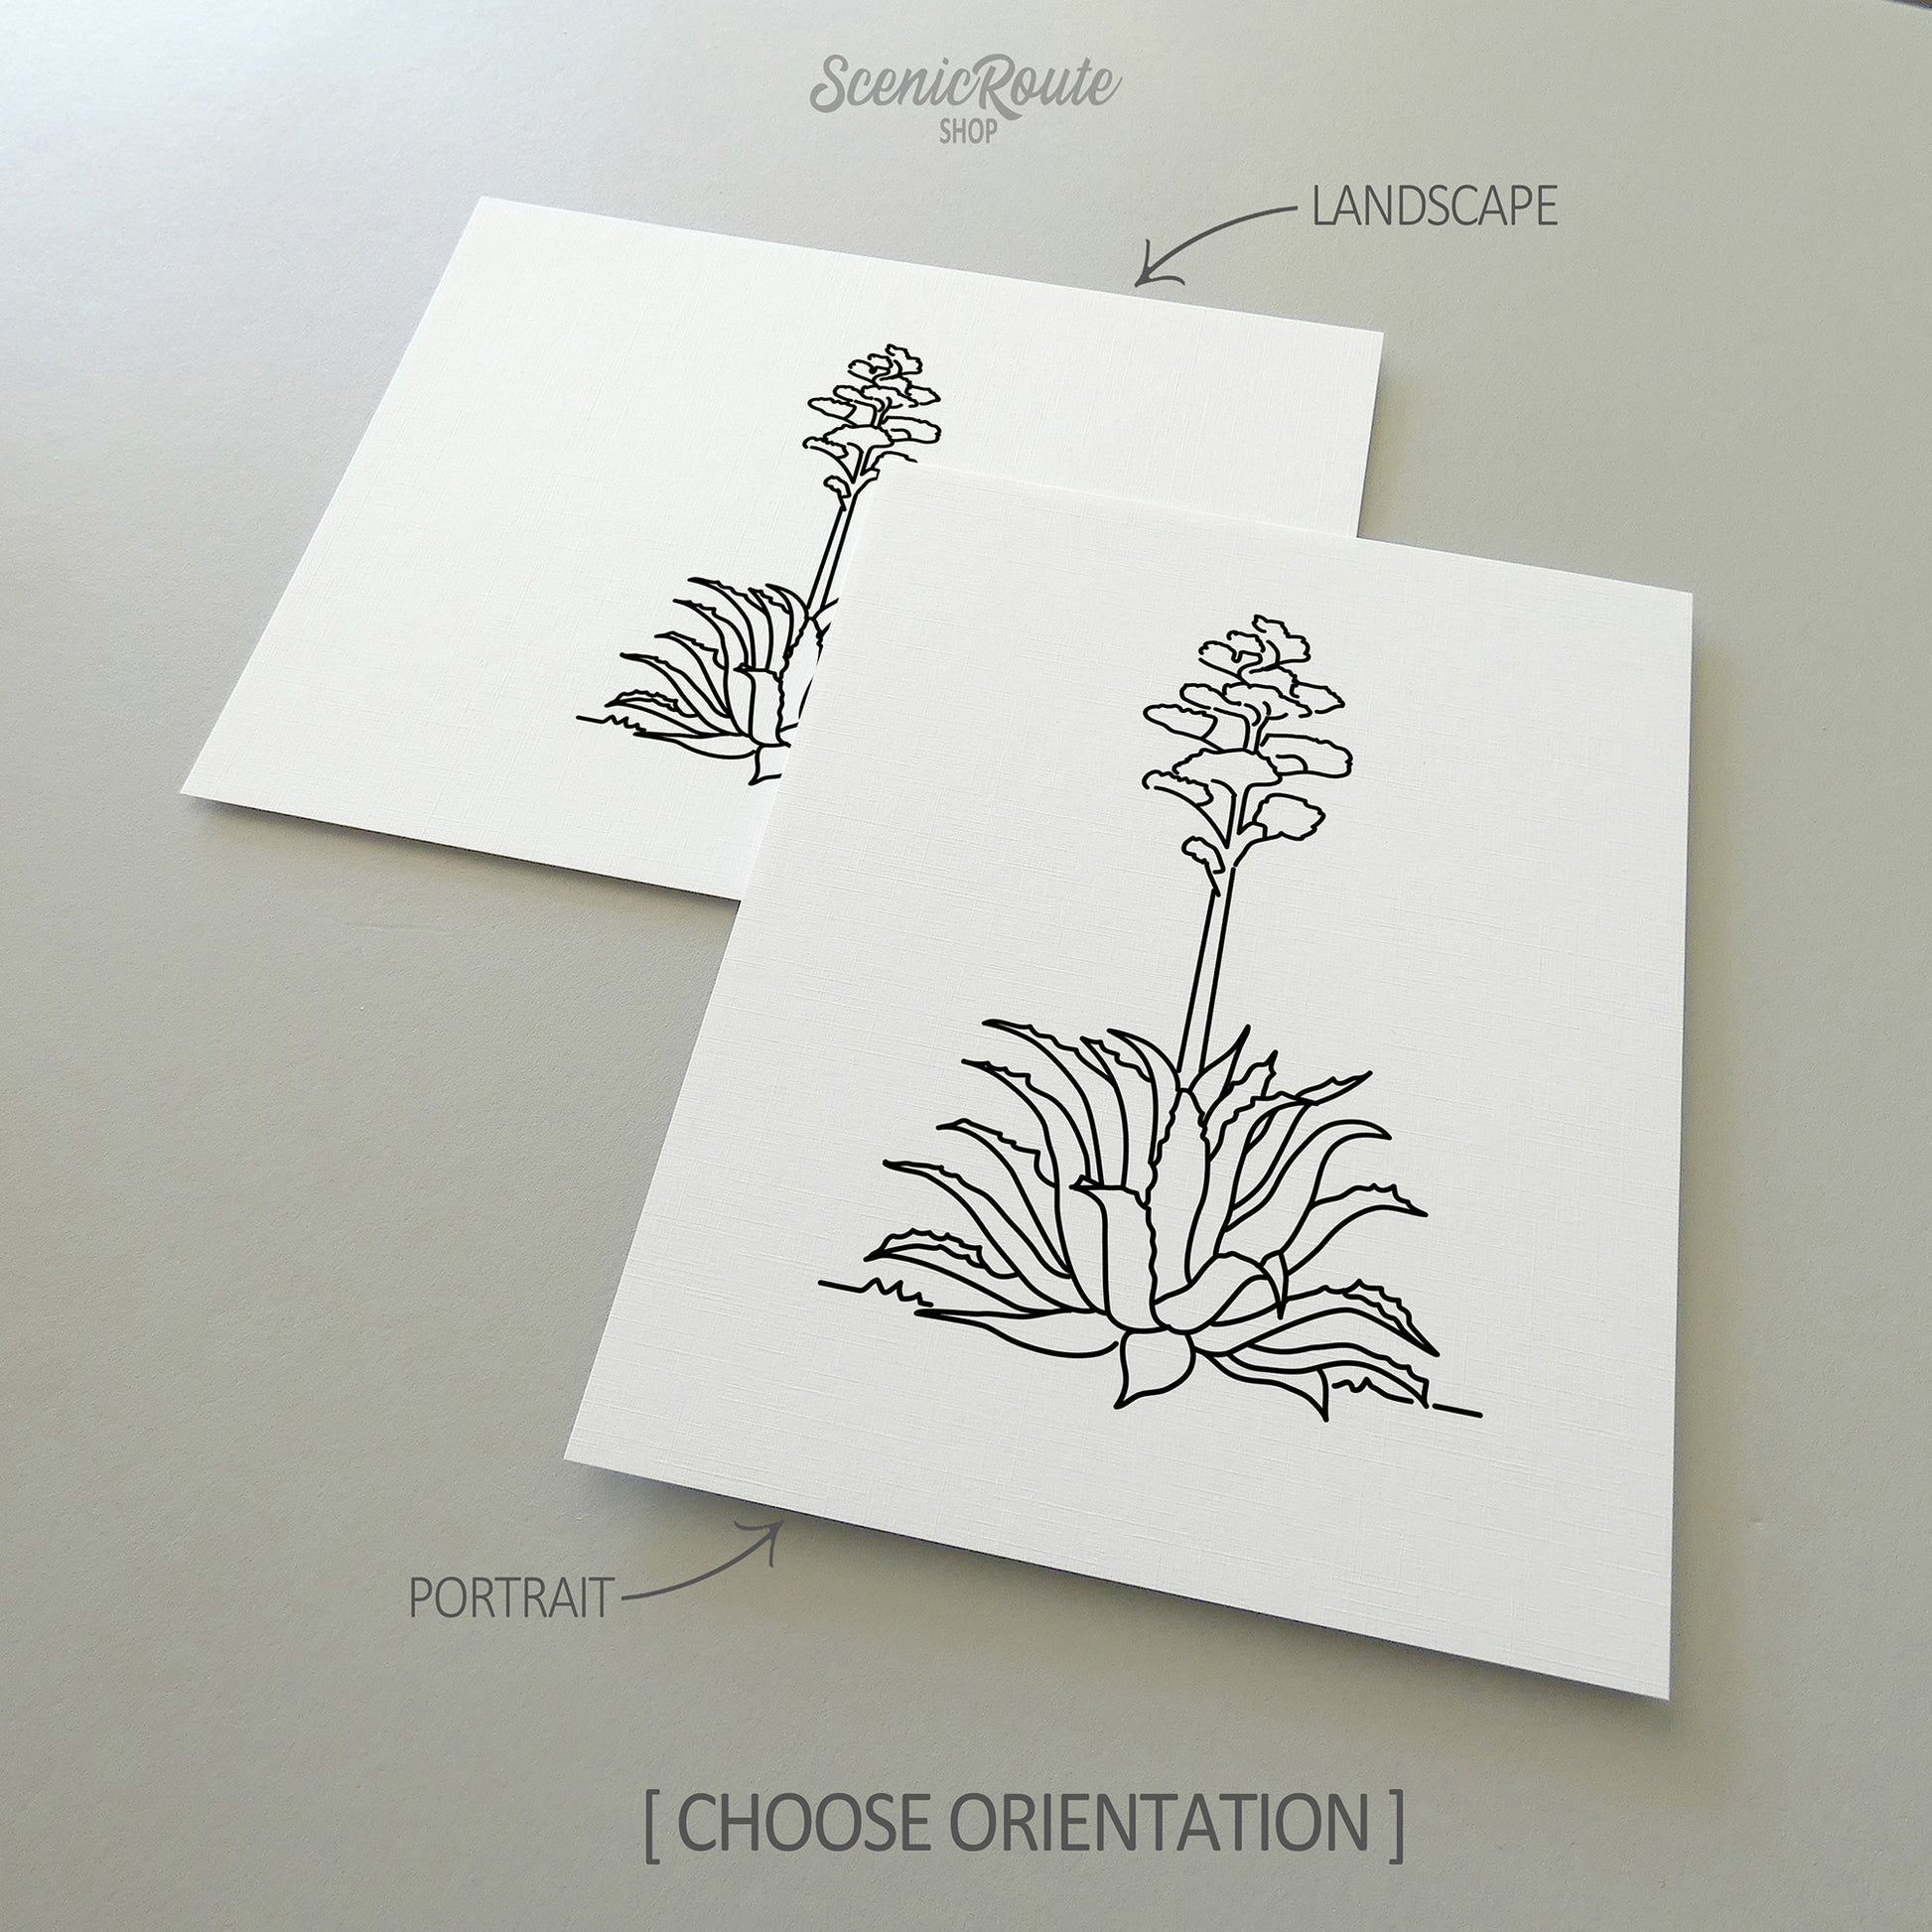 Two line art drawings of a Century Plant on white linen paper with a gray background.  The pieces are shown in portrait and landscape orientation for the available art print options.